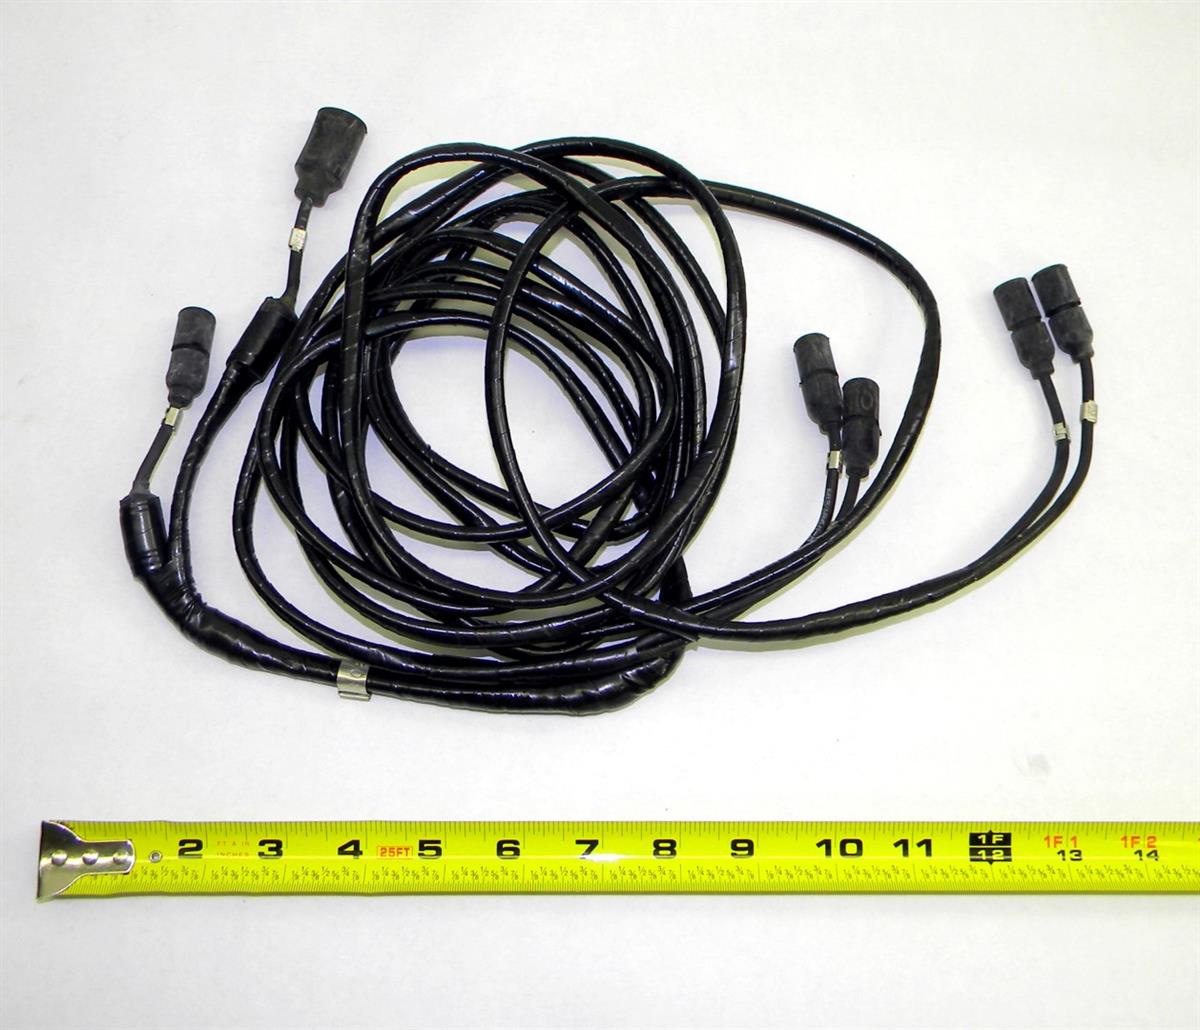 SP-1739 | 2590-00-533-3405 Branched Wiring Harness (3).JPG